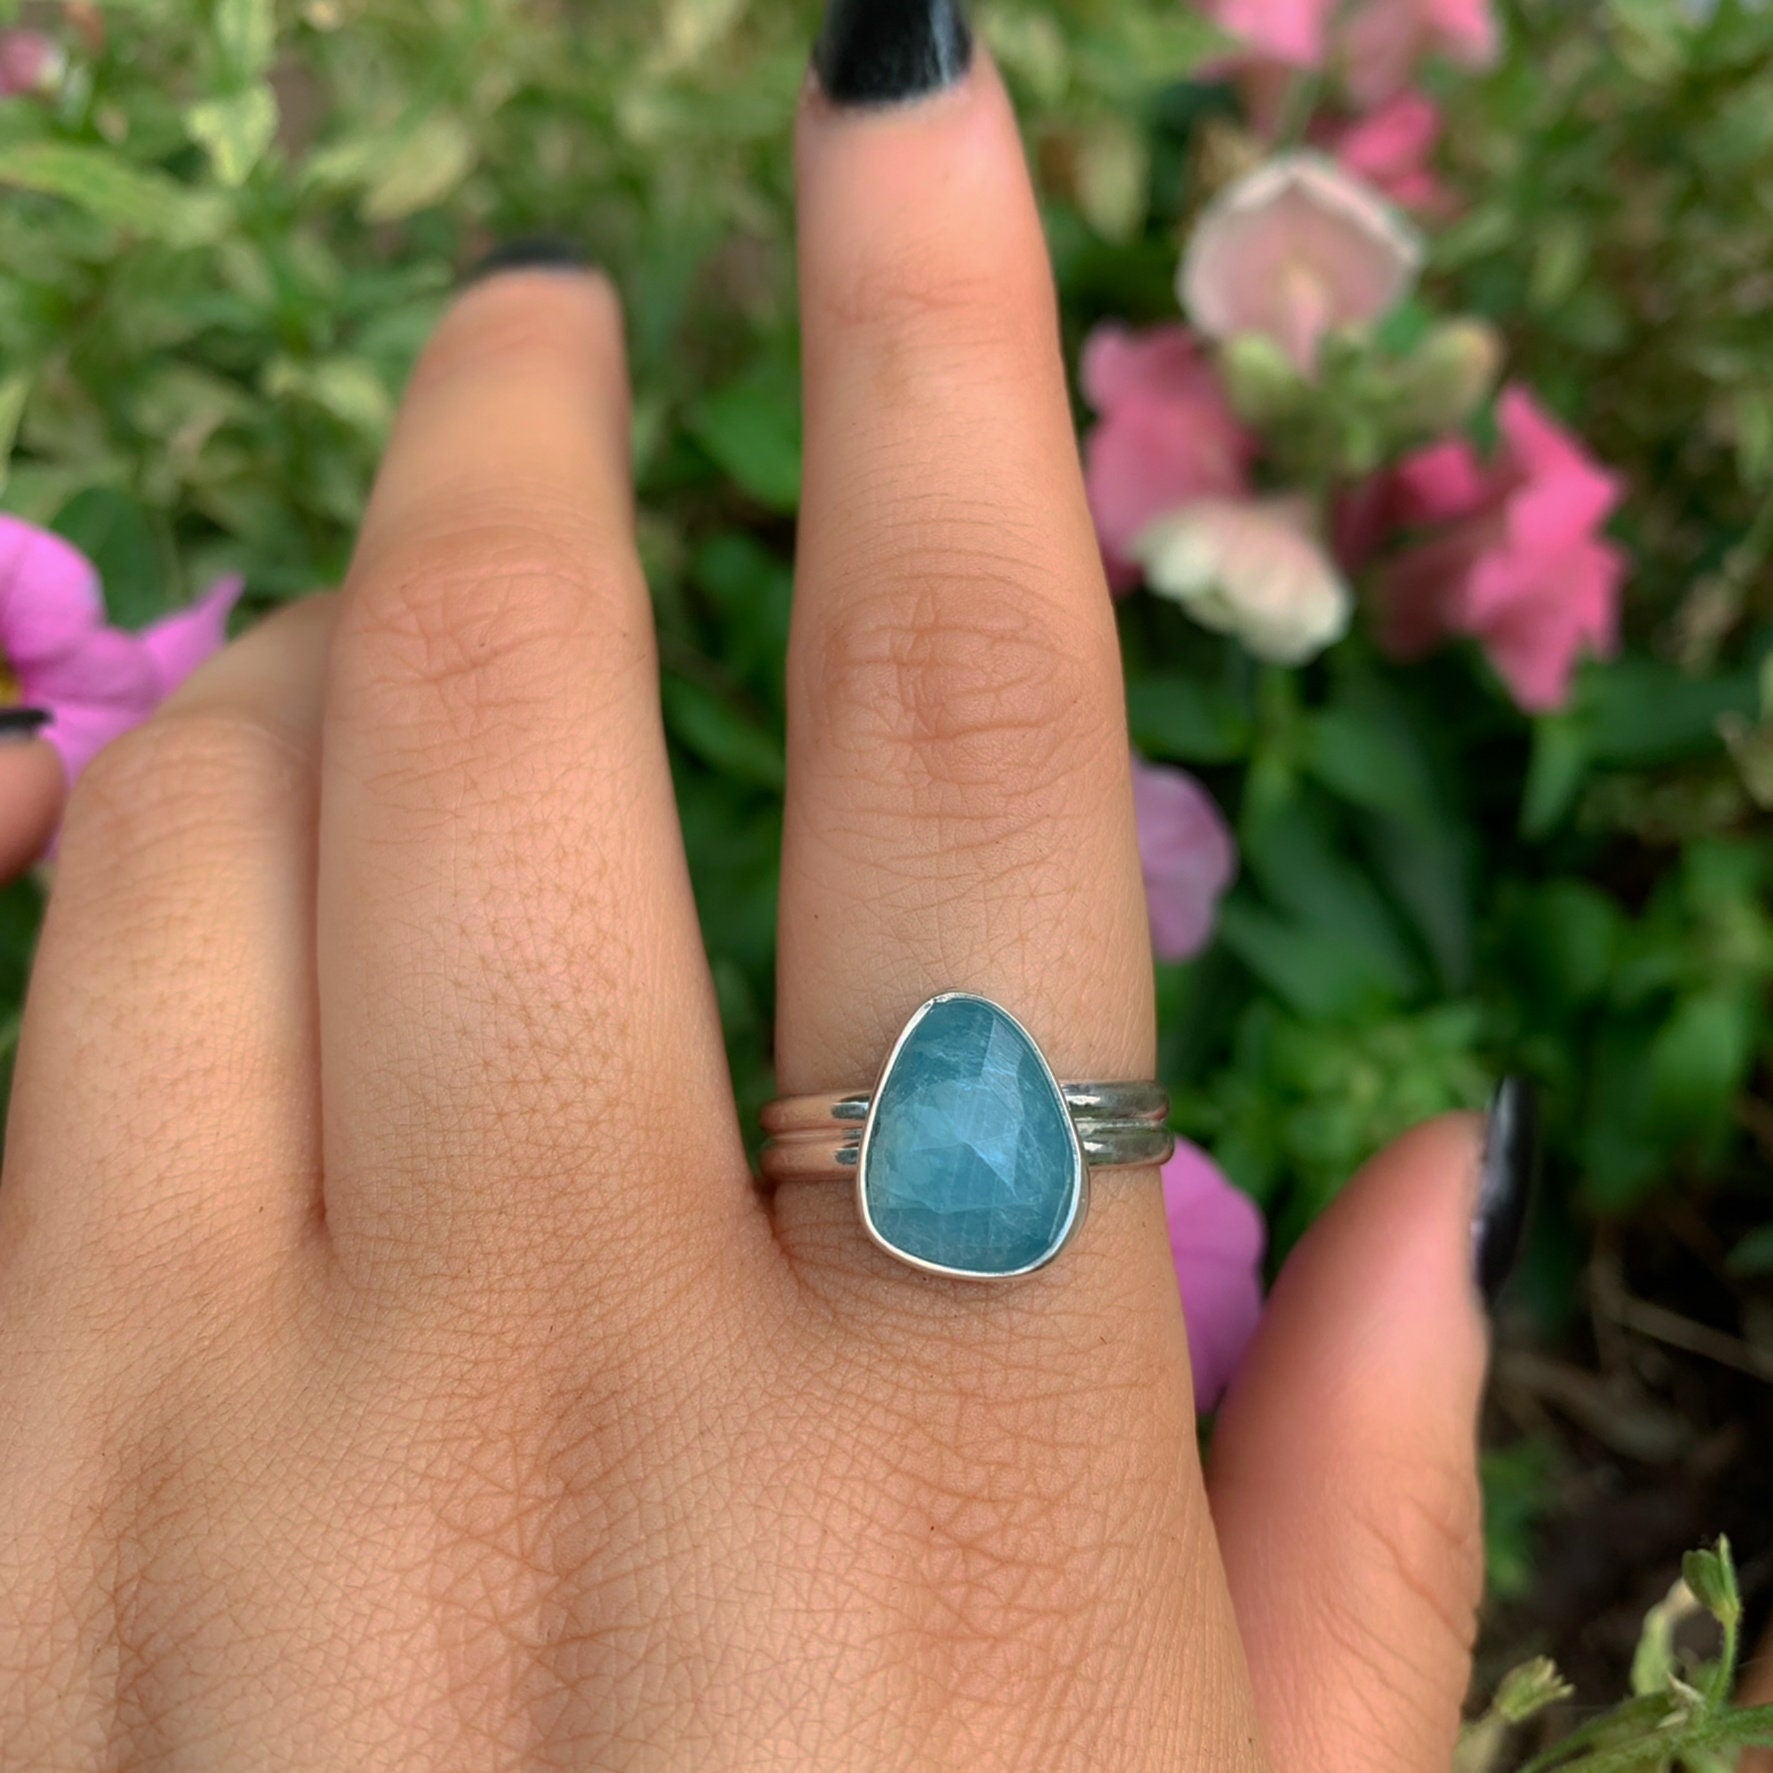 Rose Cut Aquamarine Ring - Size 10 1/4 - Sterling Silver - Aquamarine Jewellery - Blue Aquamarine Ring - Unique Aquamarine Statement Ring